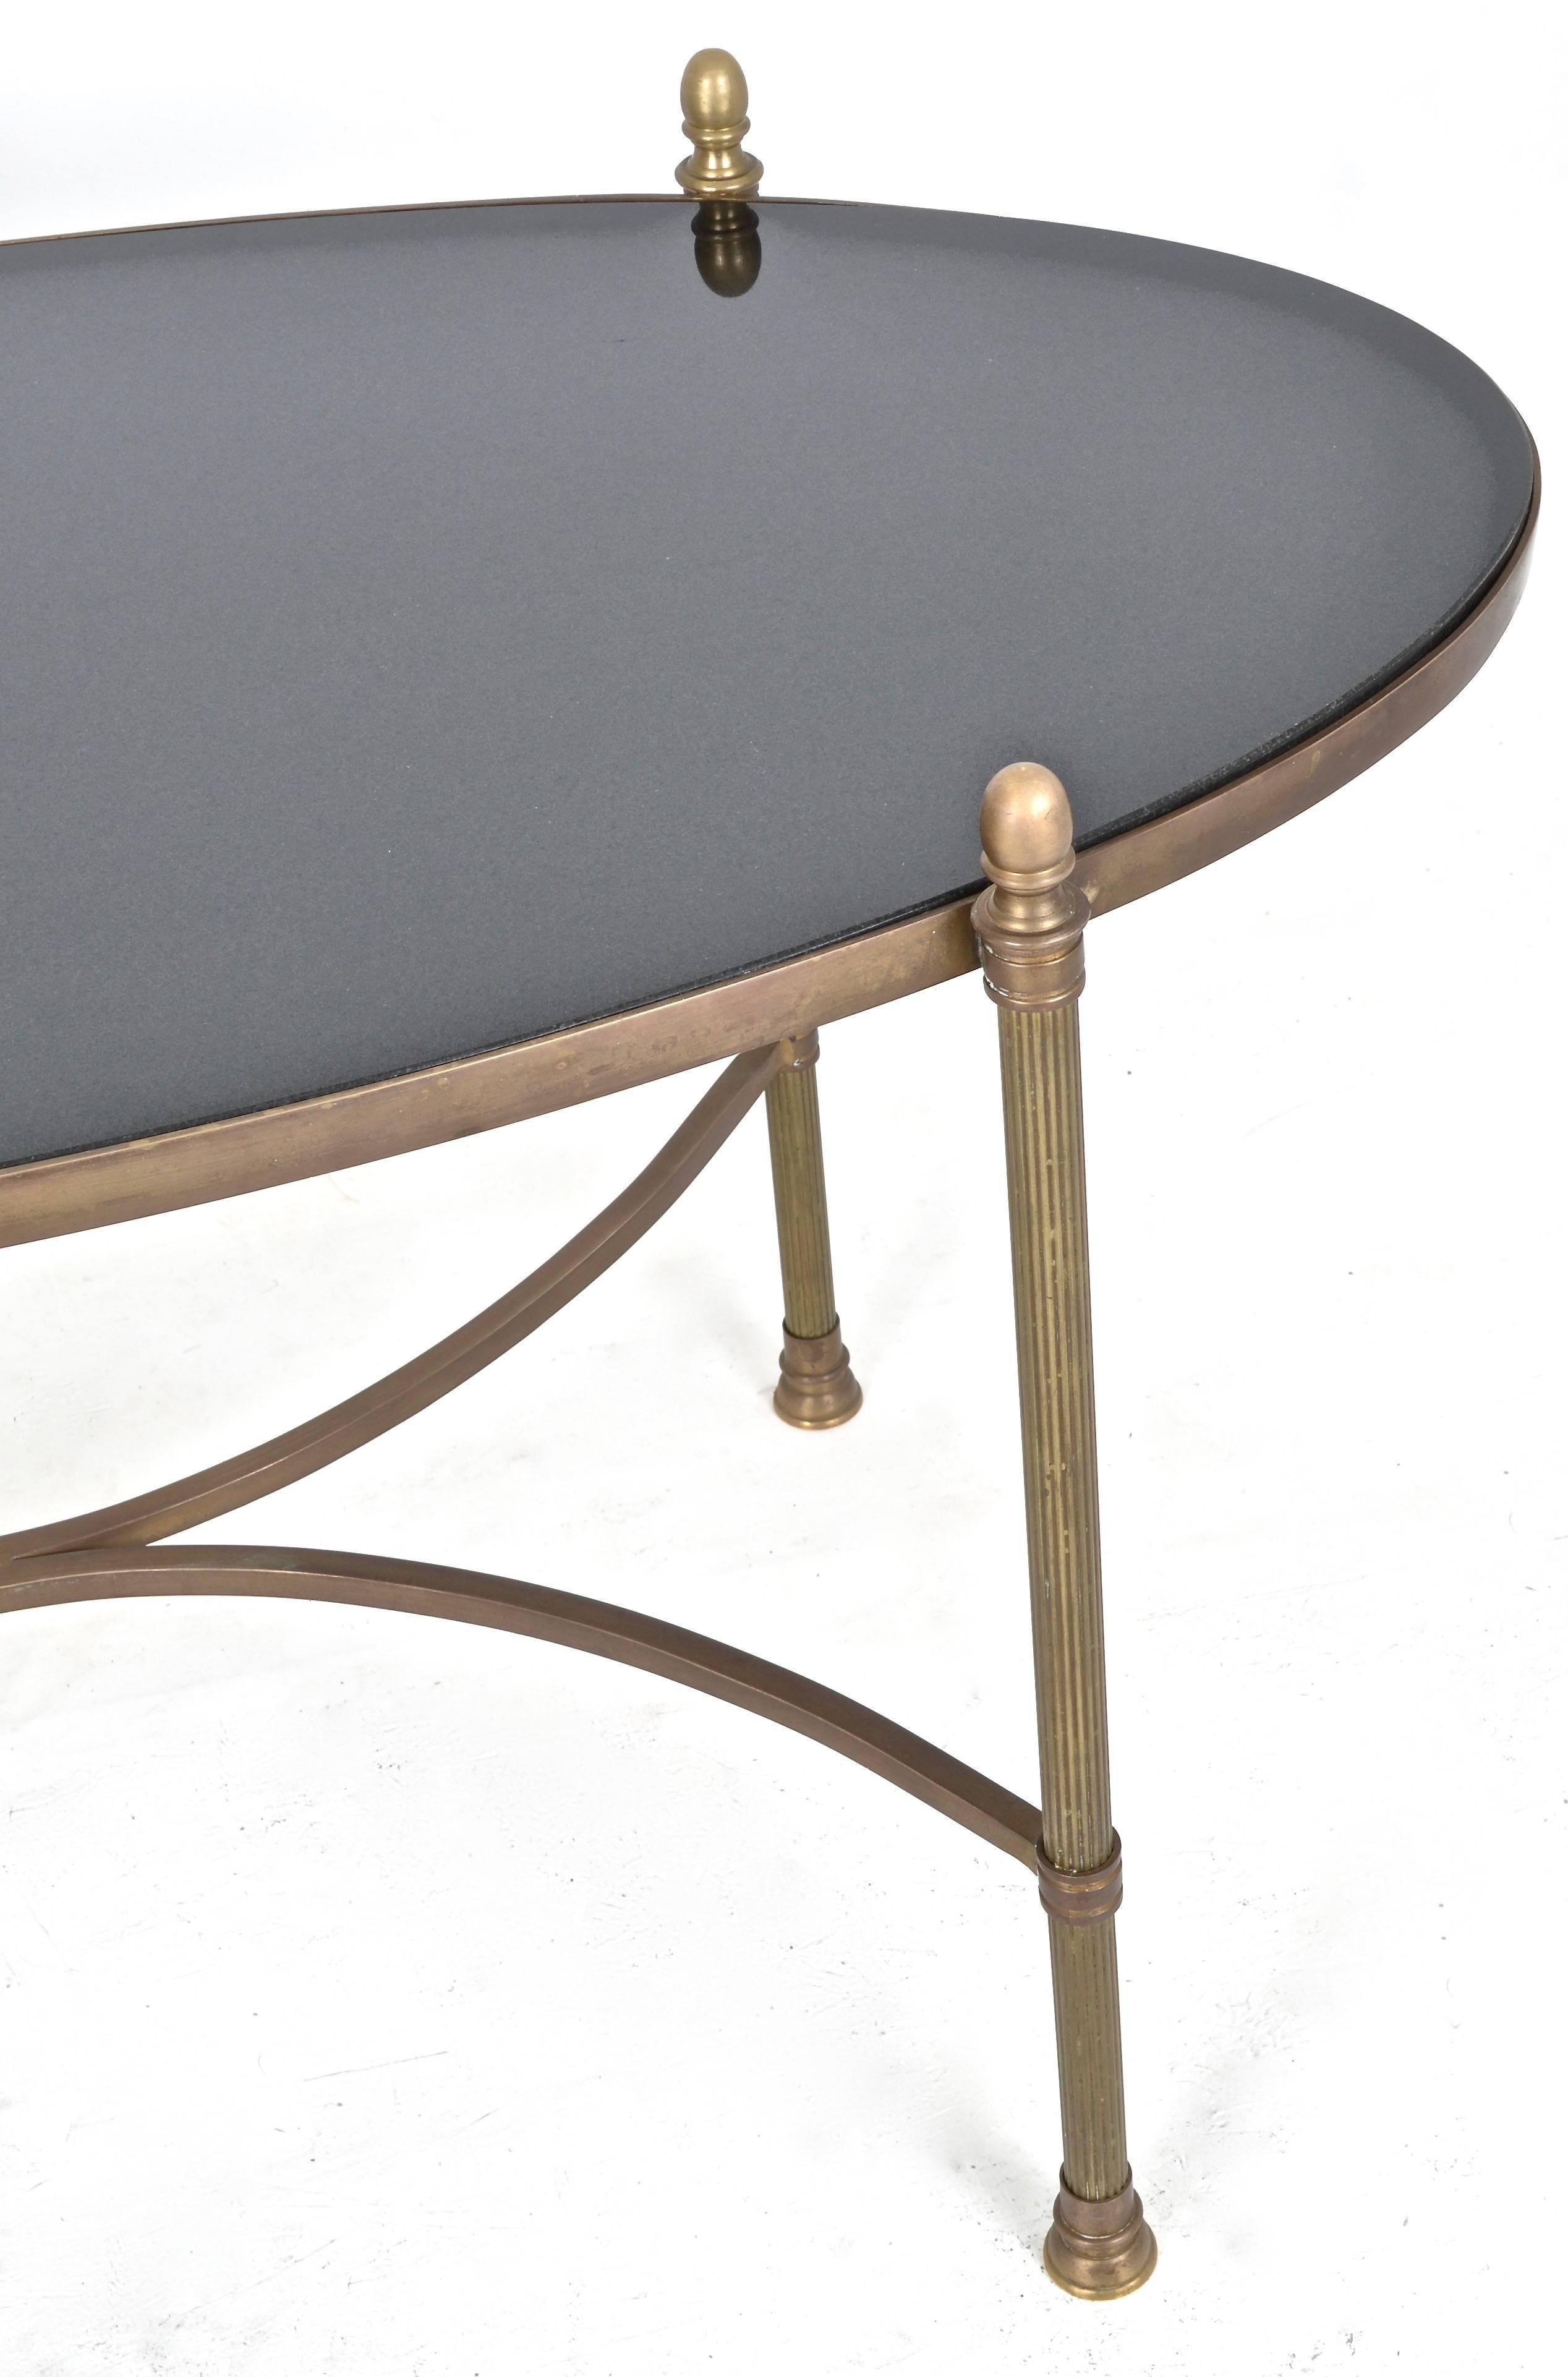 Mid-20th Century Neoclassical Style Brass and Black Granite Cocktail Table